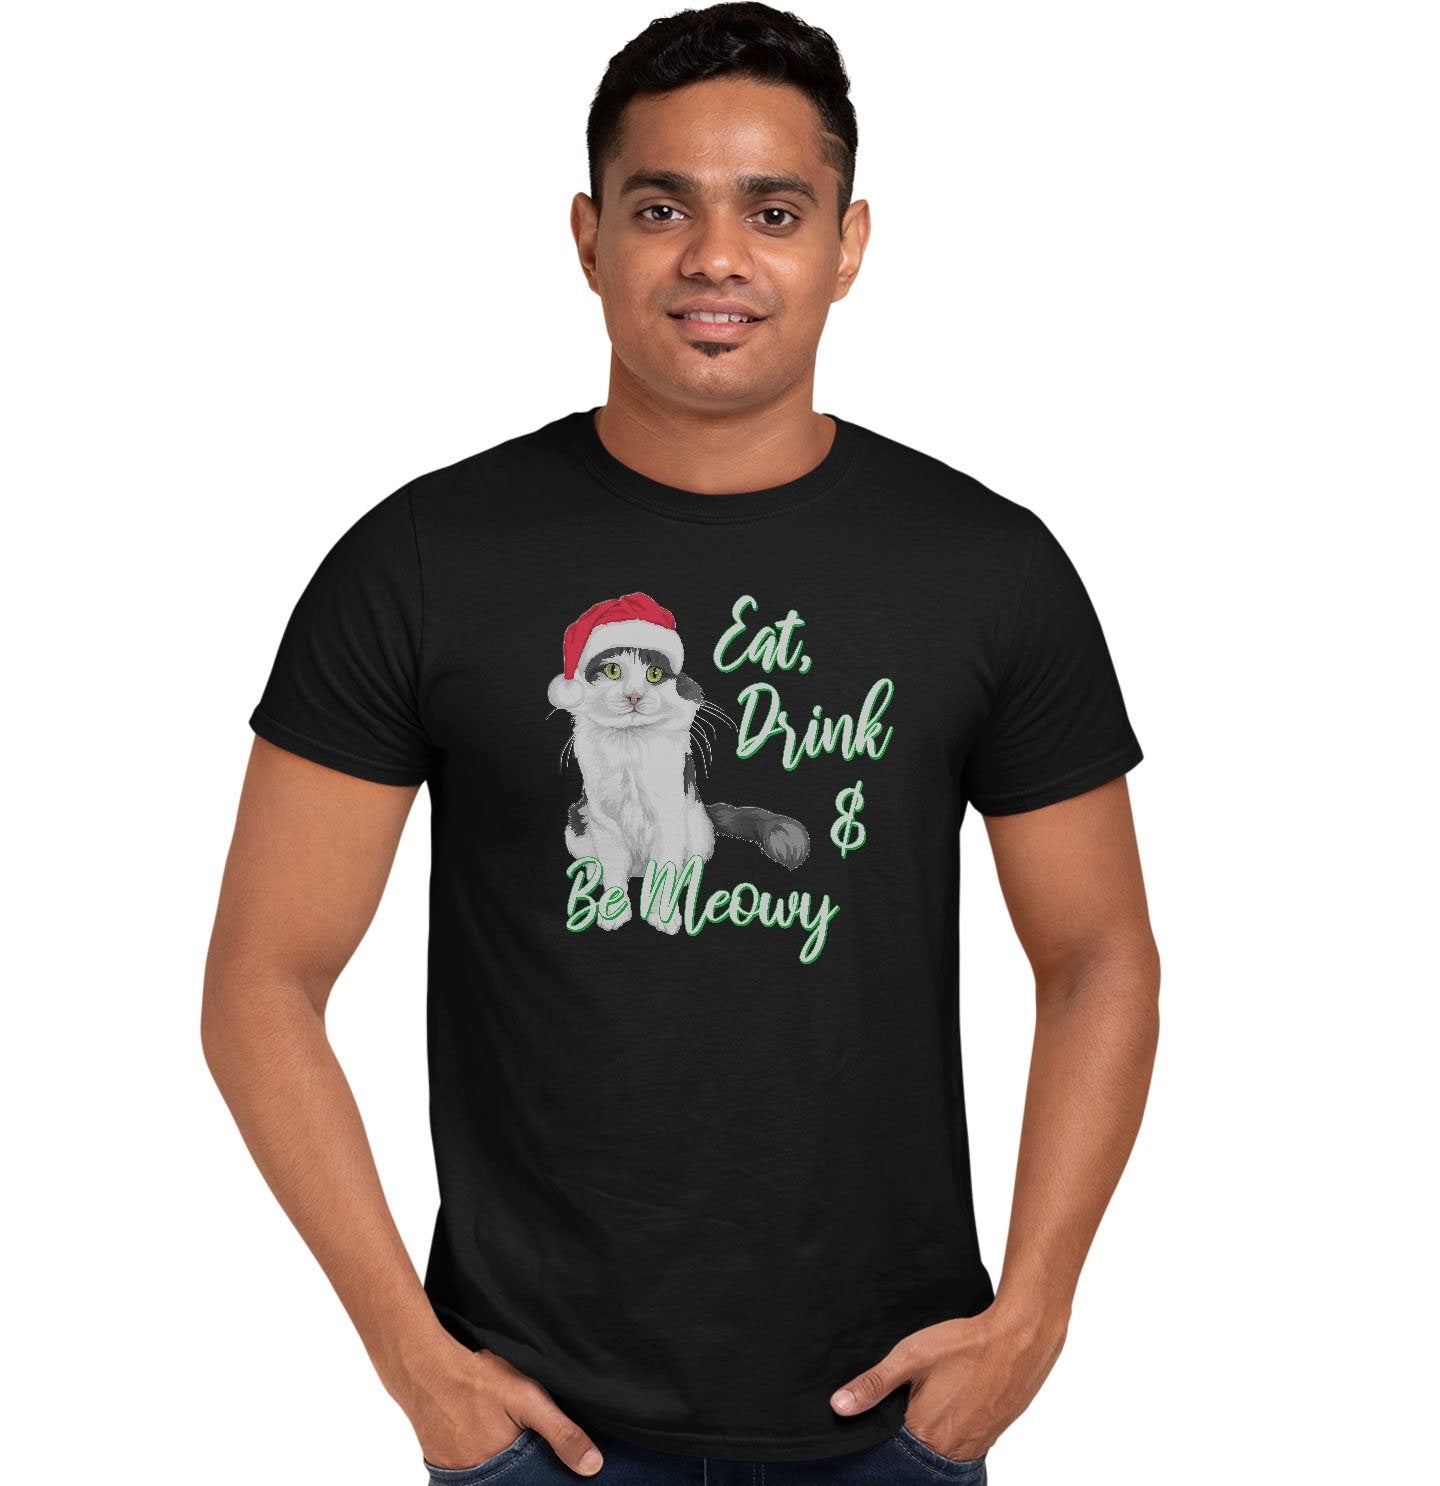 Eat Drink and Be Meowy - Adult Unisex T-Shirt